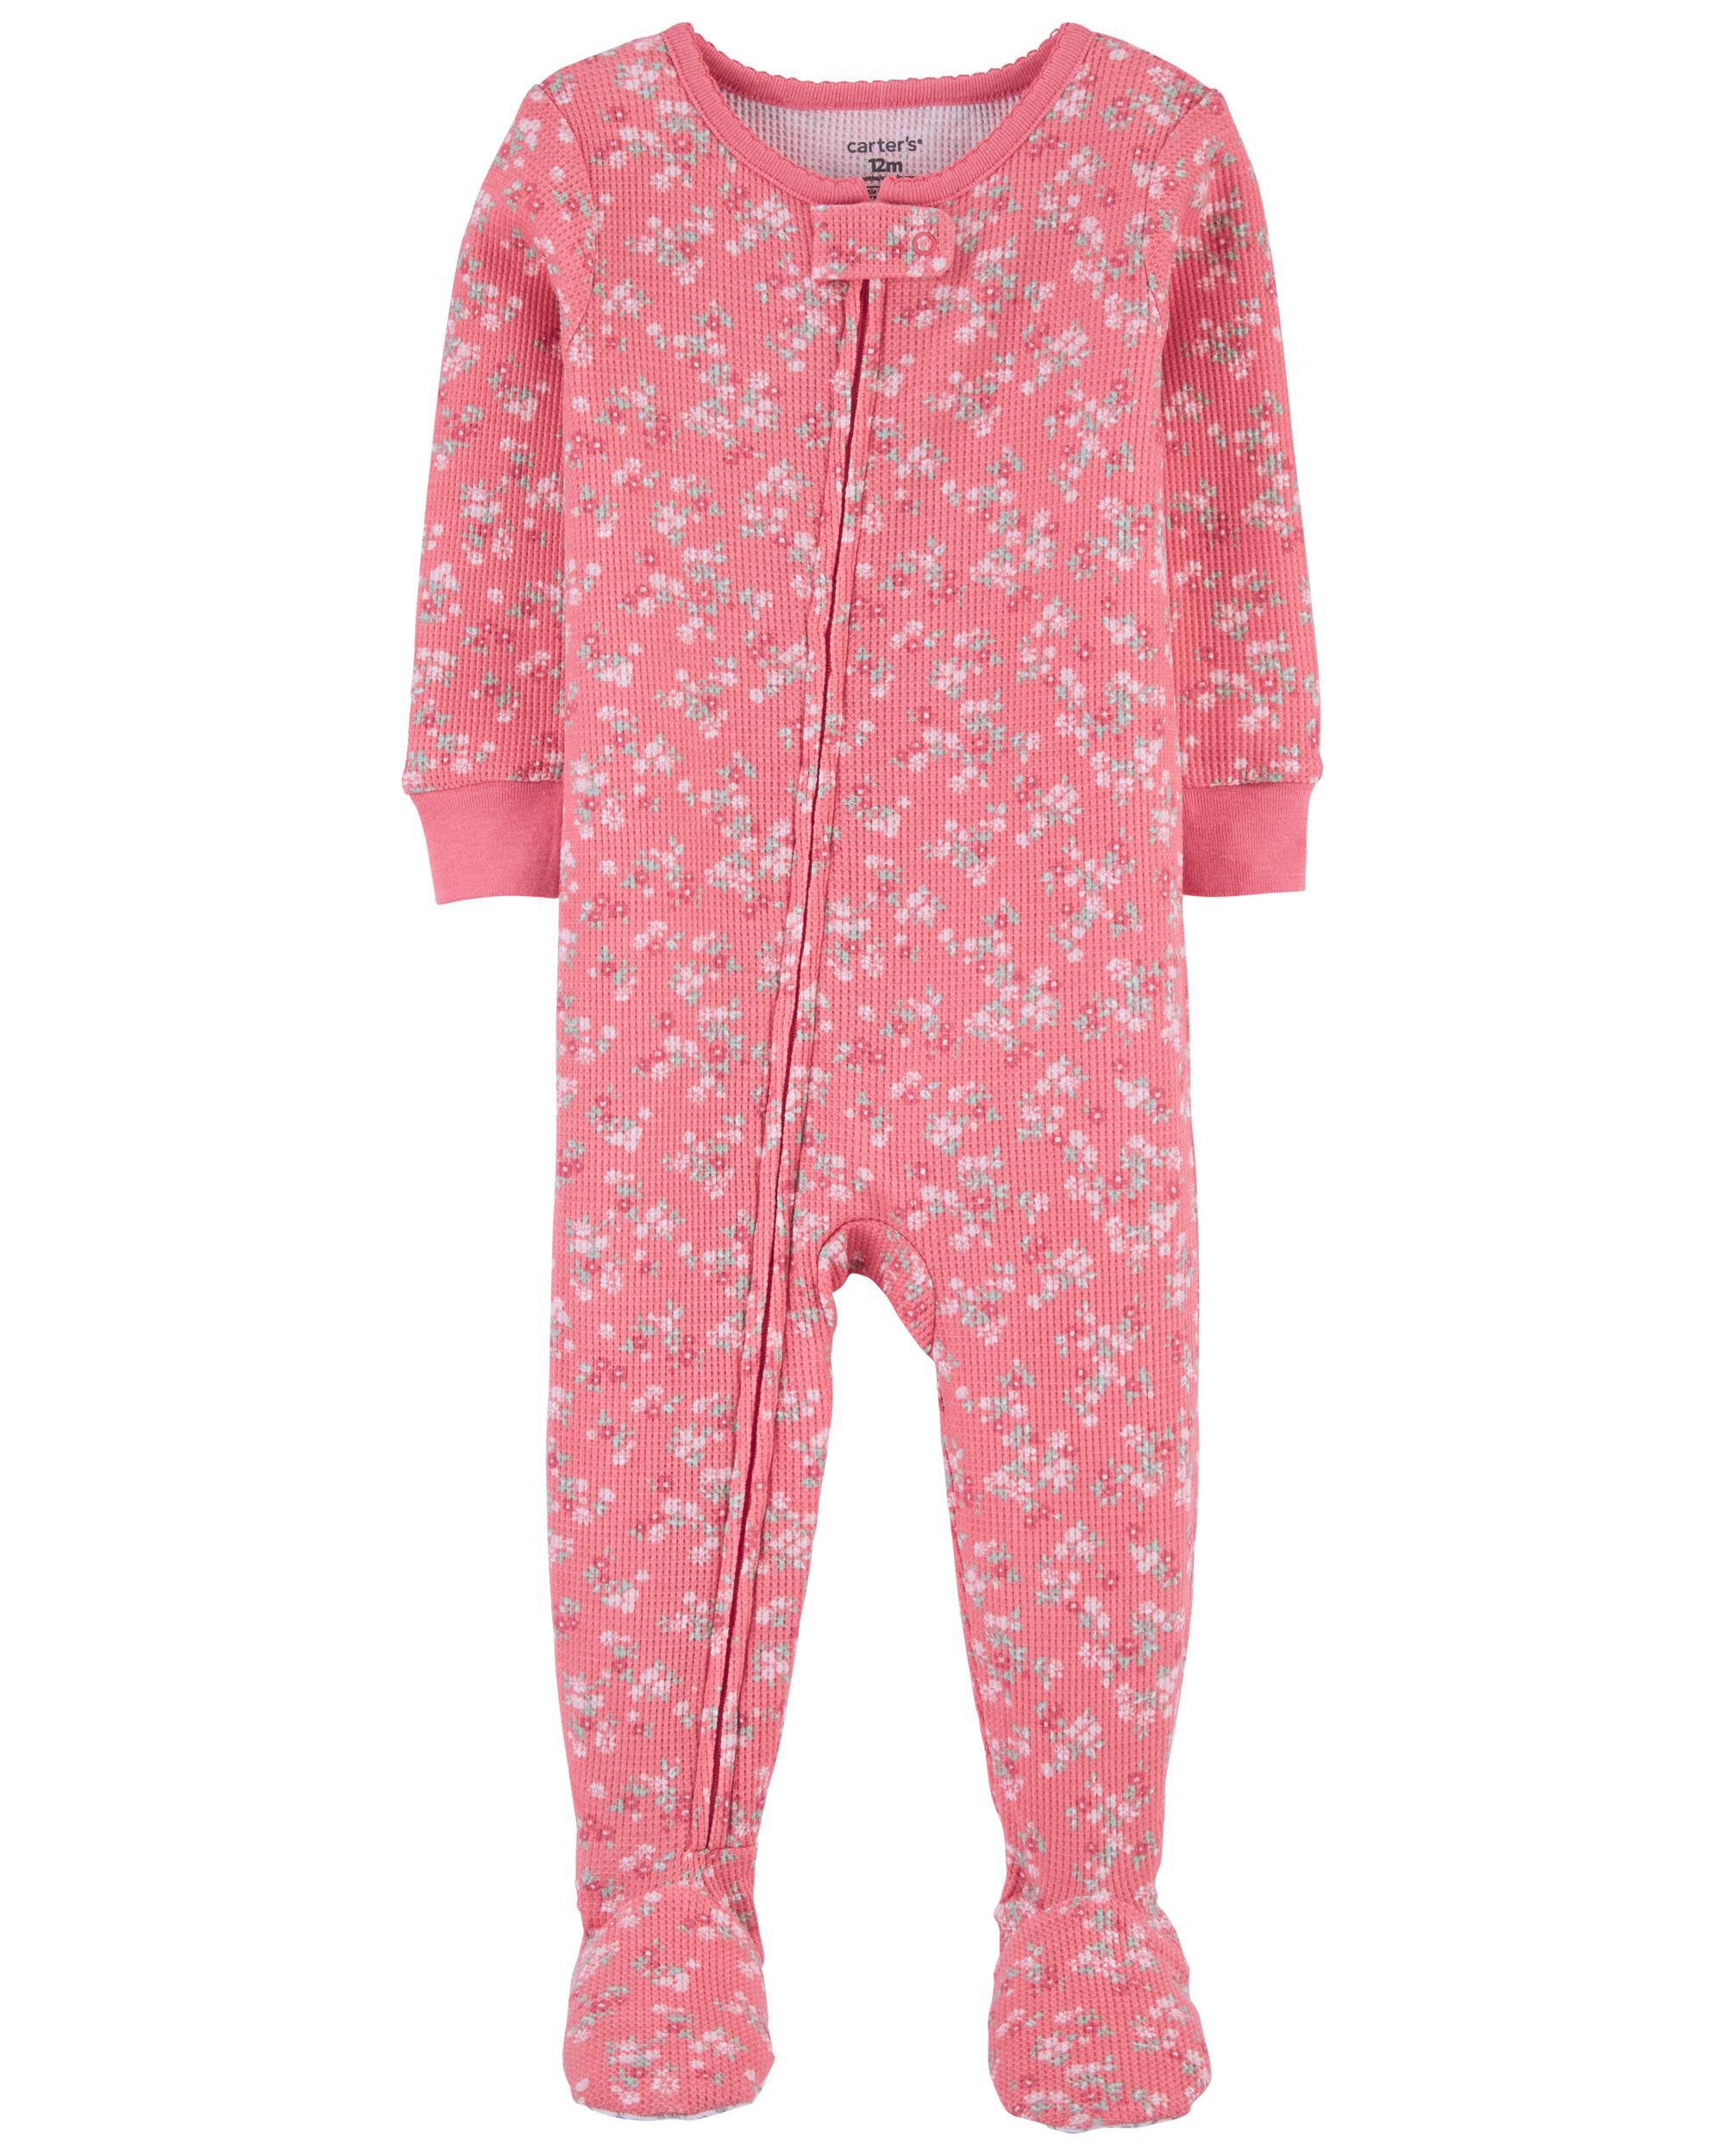 Carters NWT 24 Months Pink Monkey Ice Skating Hearts Footed Fleece Pajama Girls 